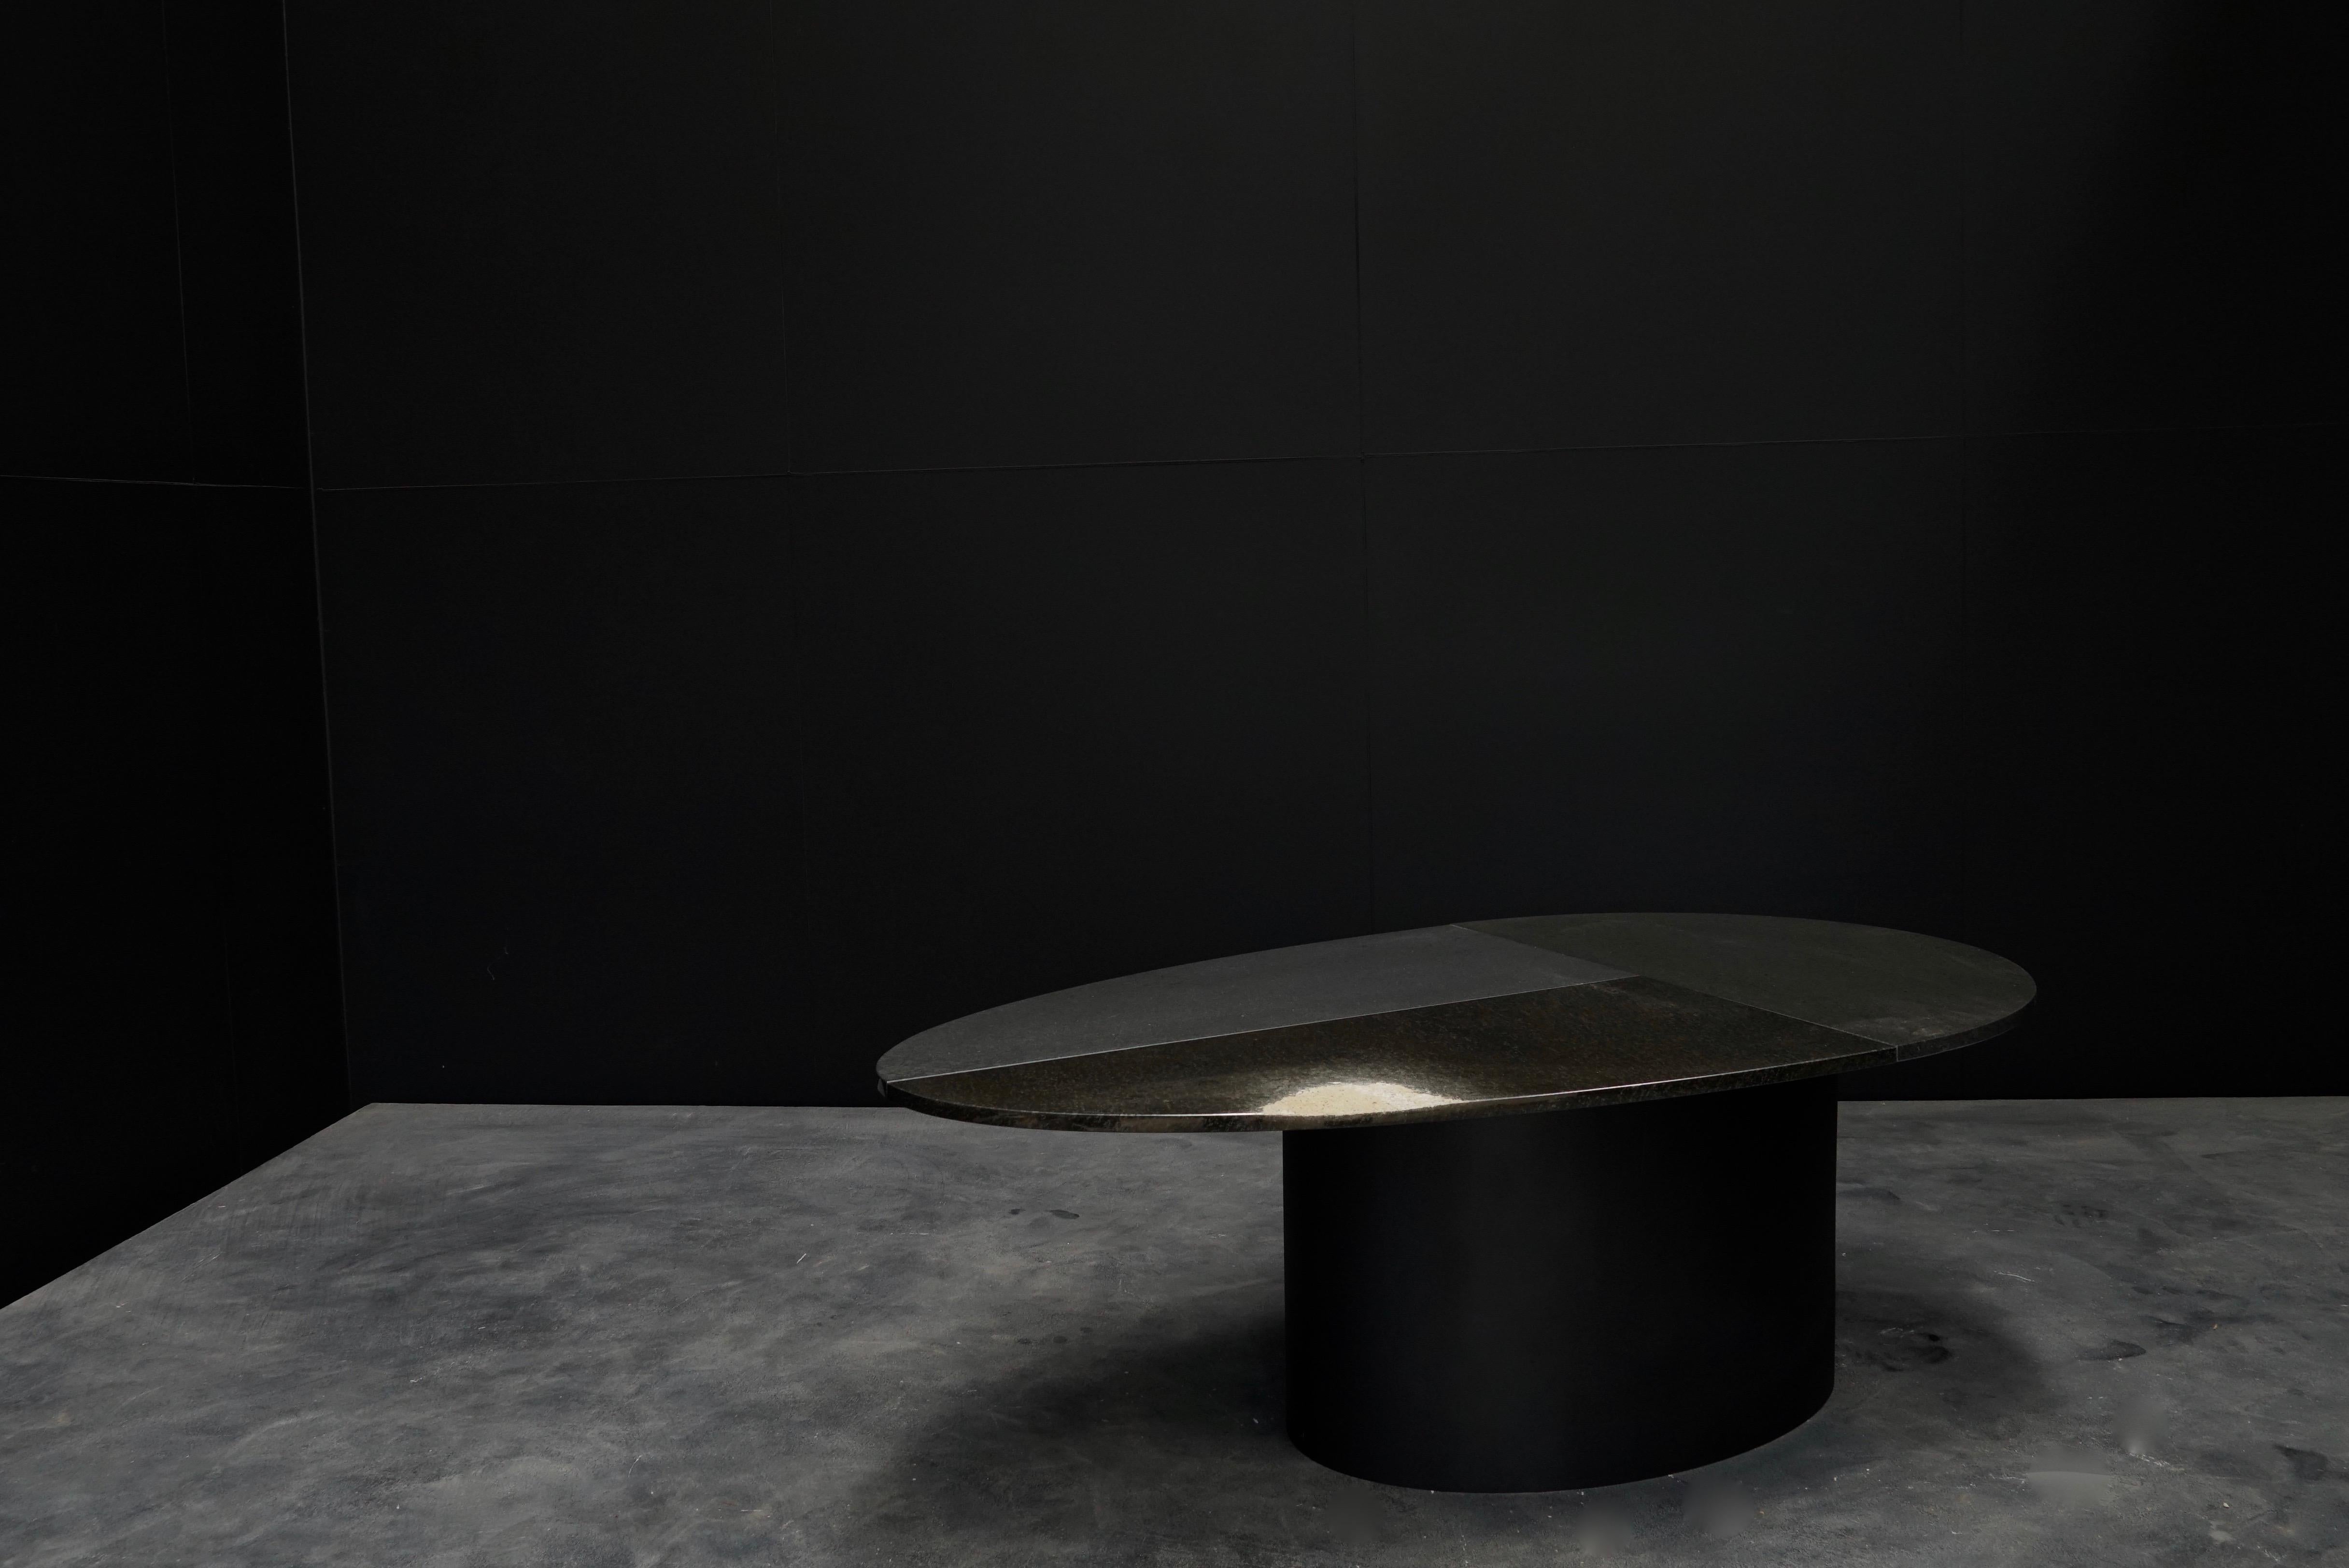 Lami table design by Okurayama Studio
Dimensions: W 120 x D 70 x H 41.8 cm
Materiel: Daté Kan Stone
Sculpted in the Okurayama's Studio in Miyagi's Prefecture, Japan
Each creation is unique due to the uniqueness of the stone aesthetic

This low